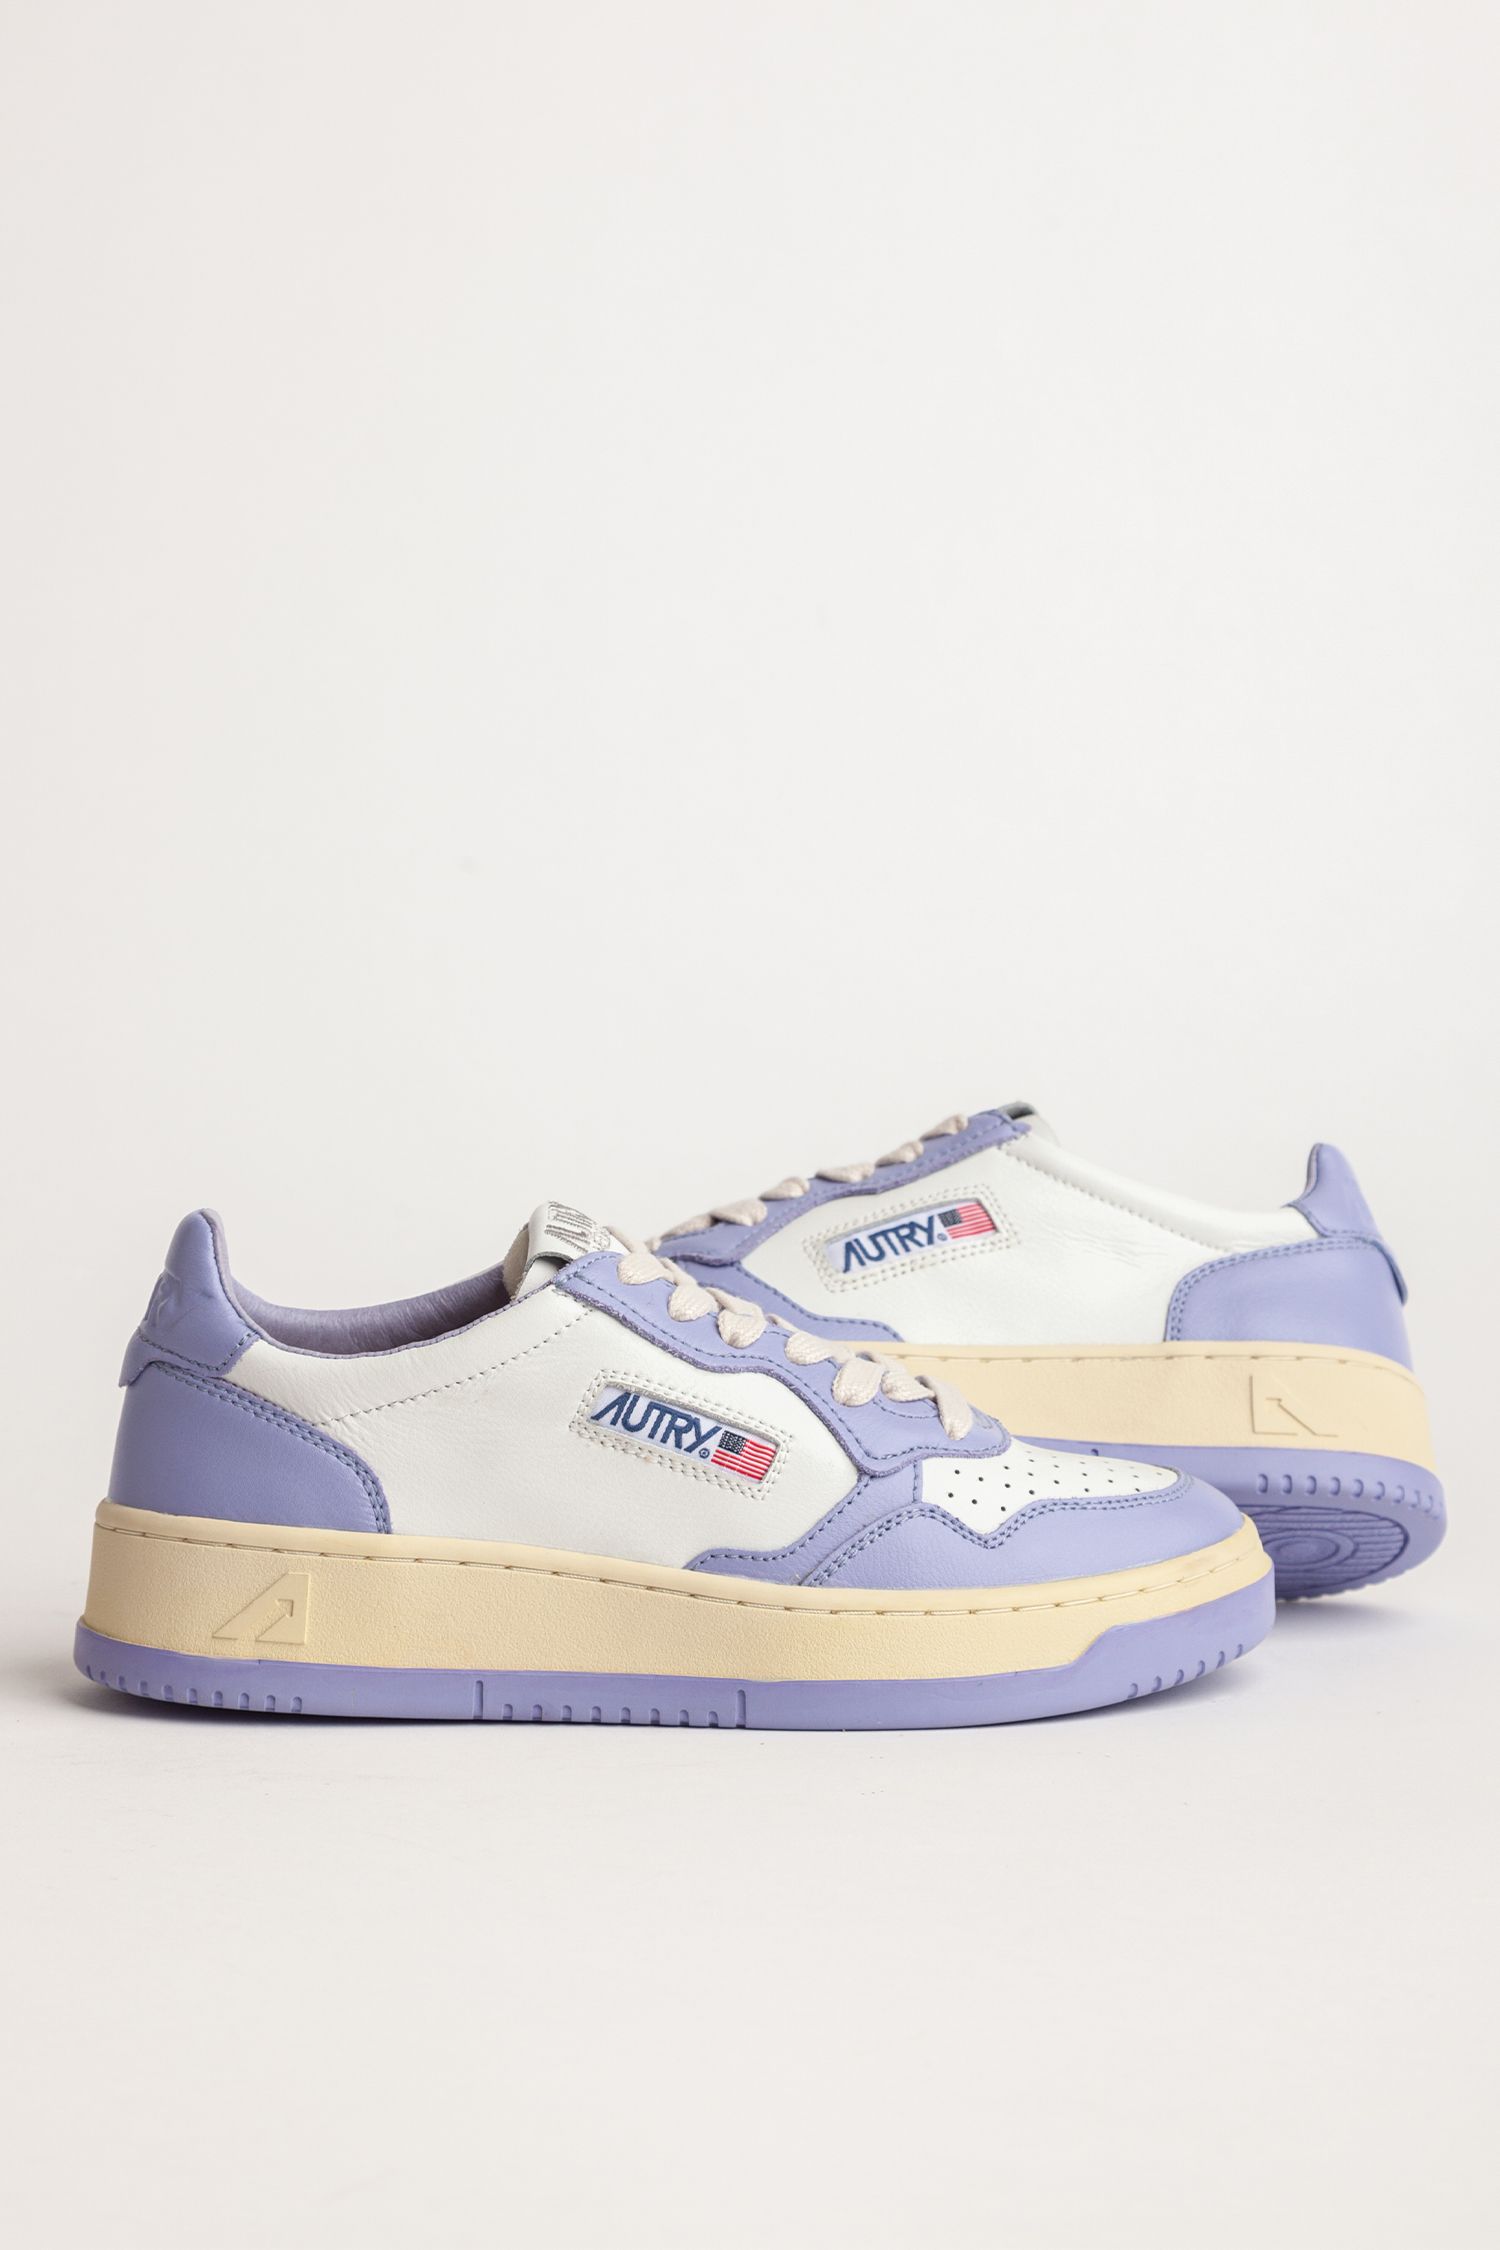 Sneaker Medalist low leather White/Lavender AUTRY, Autry, Medalist